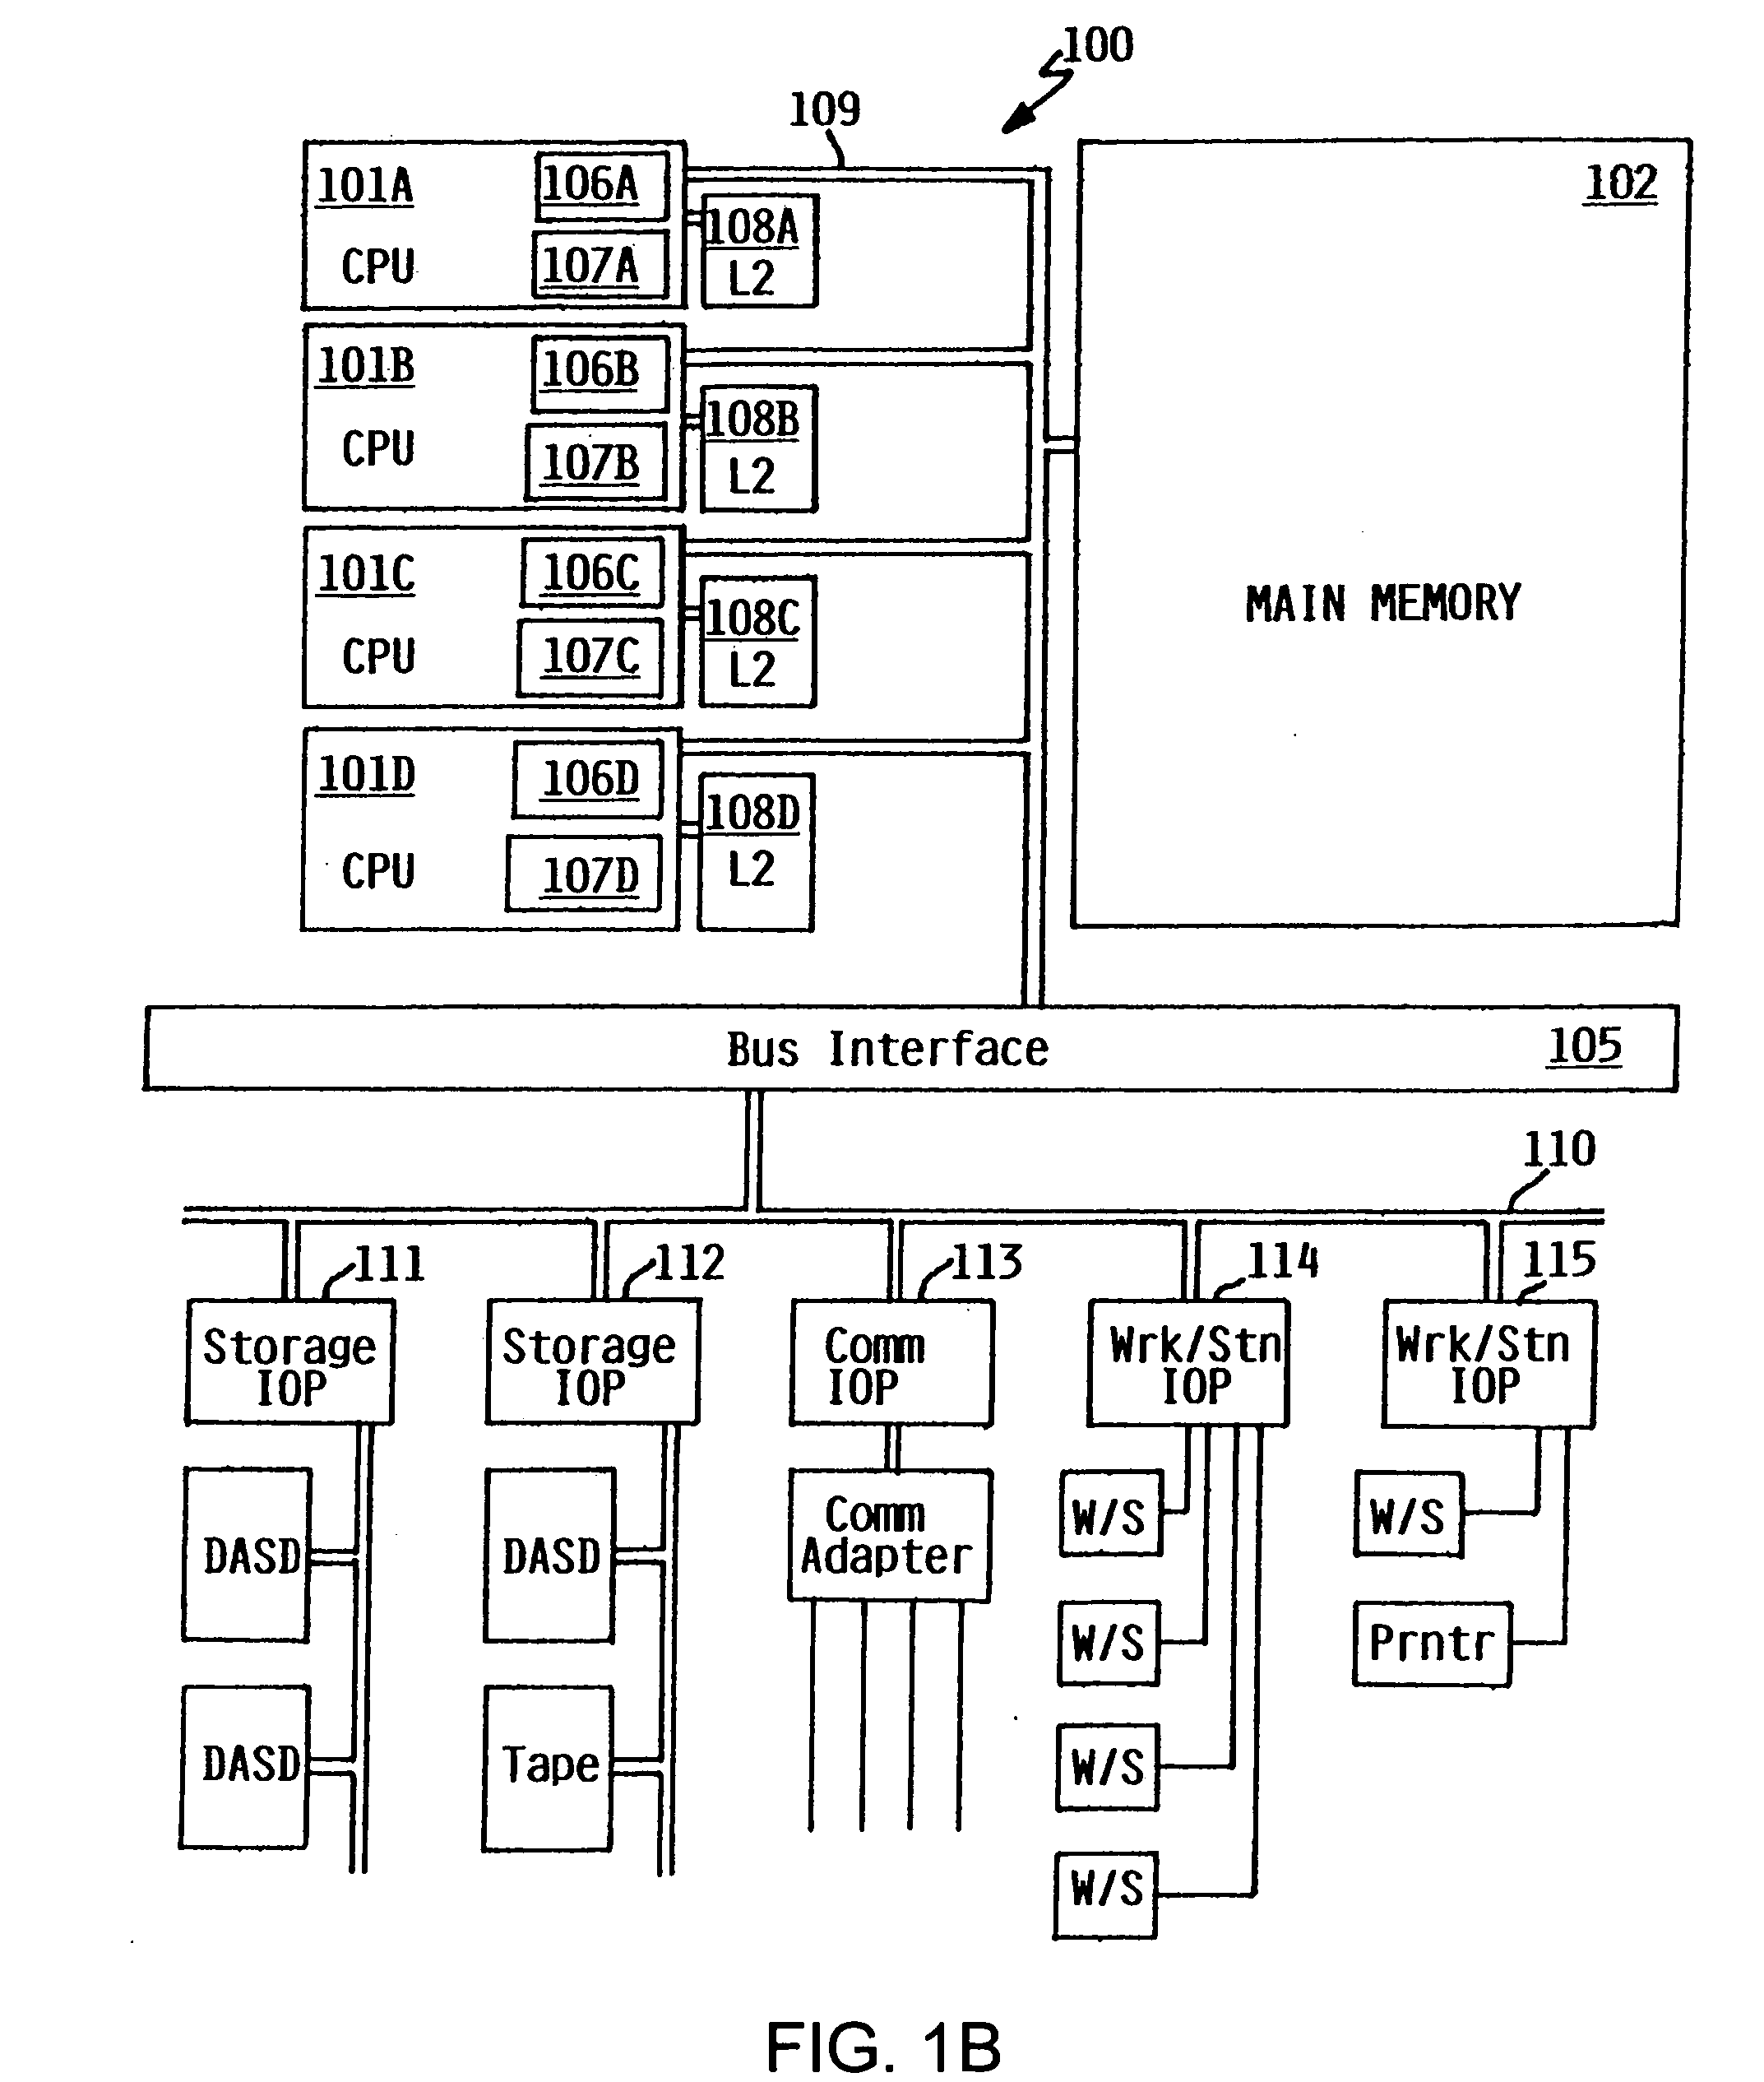 Method and apparatus for testing, characterizing and monitoring a chip interface using a second data path